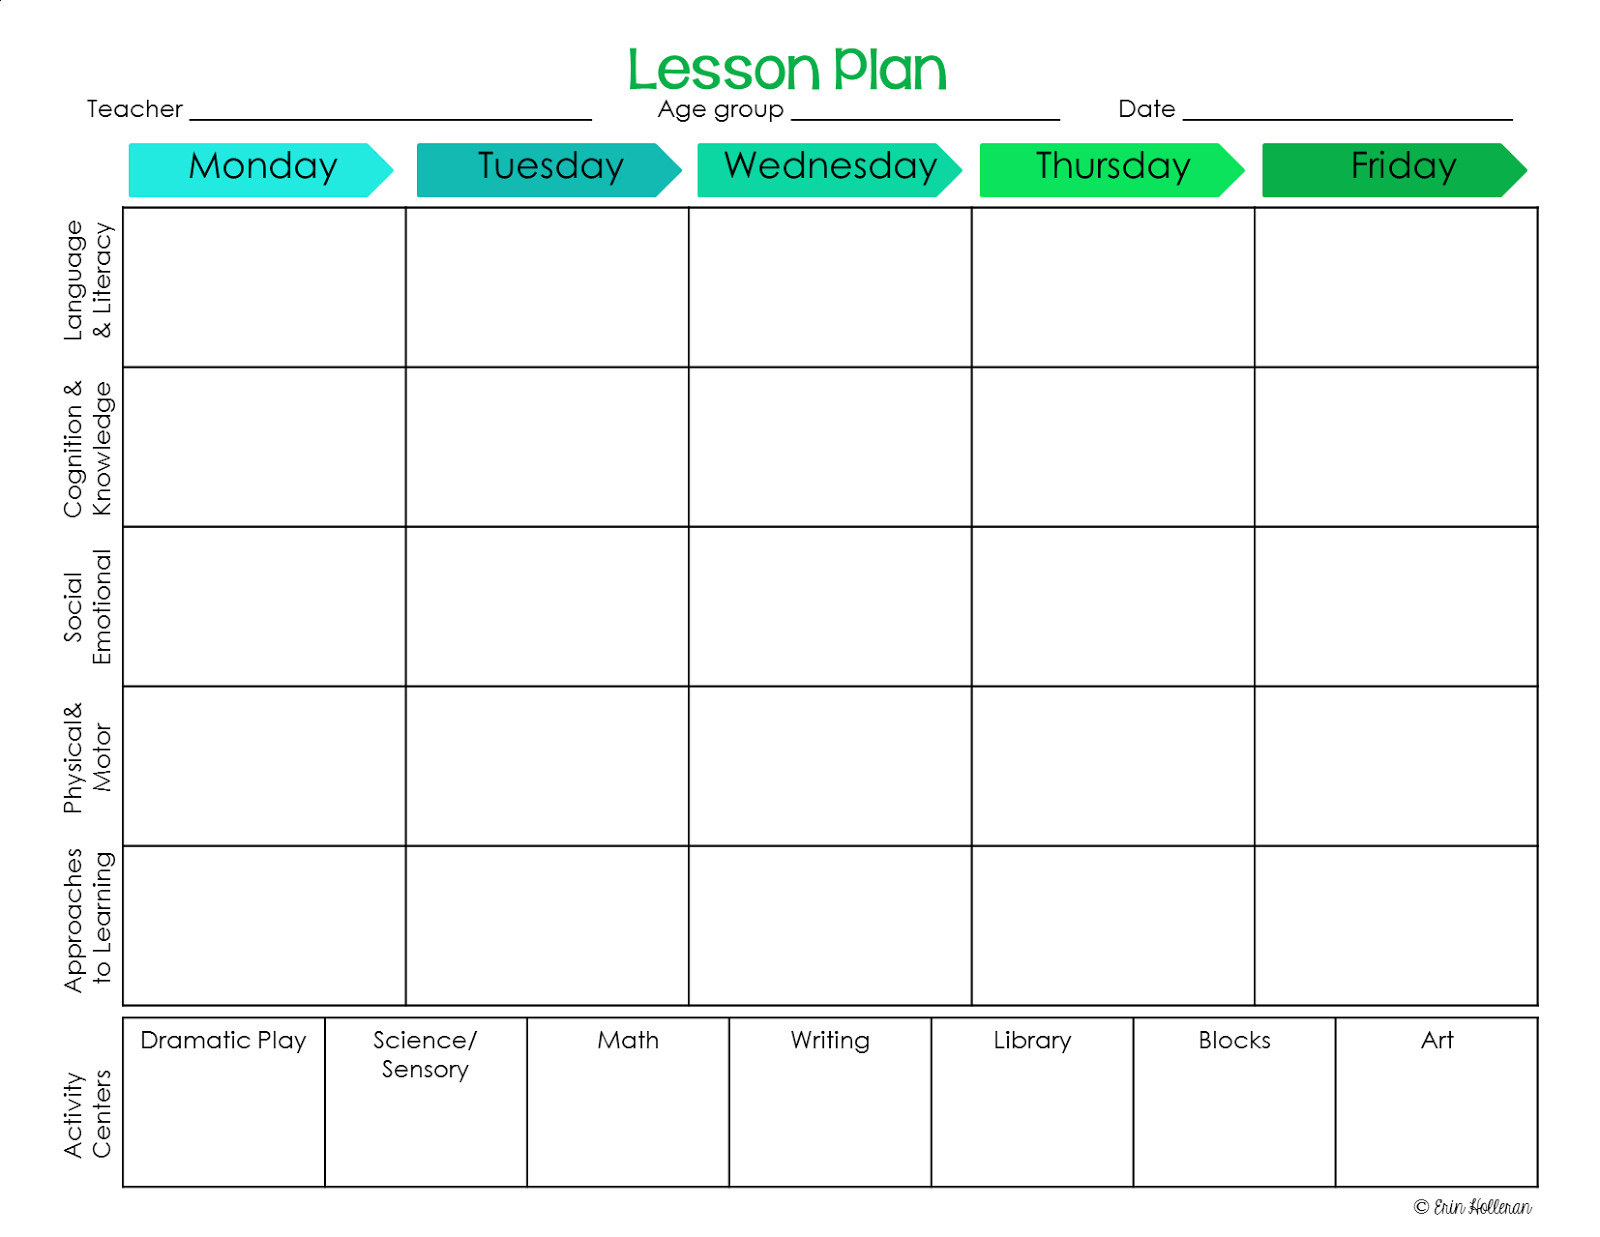 Lesson Plans that Work Preschool Ponderings Make Your Lesson Plans Work for You